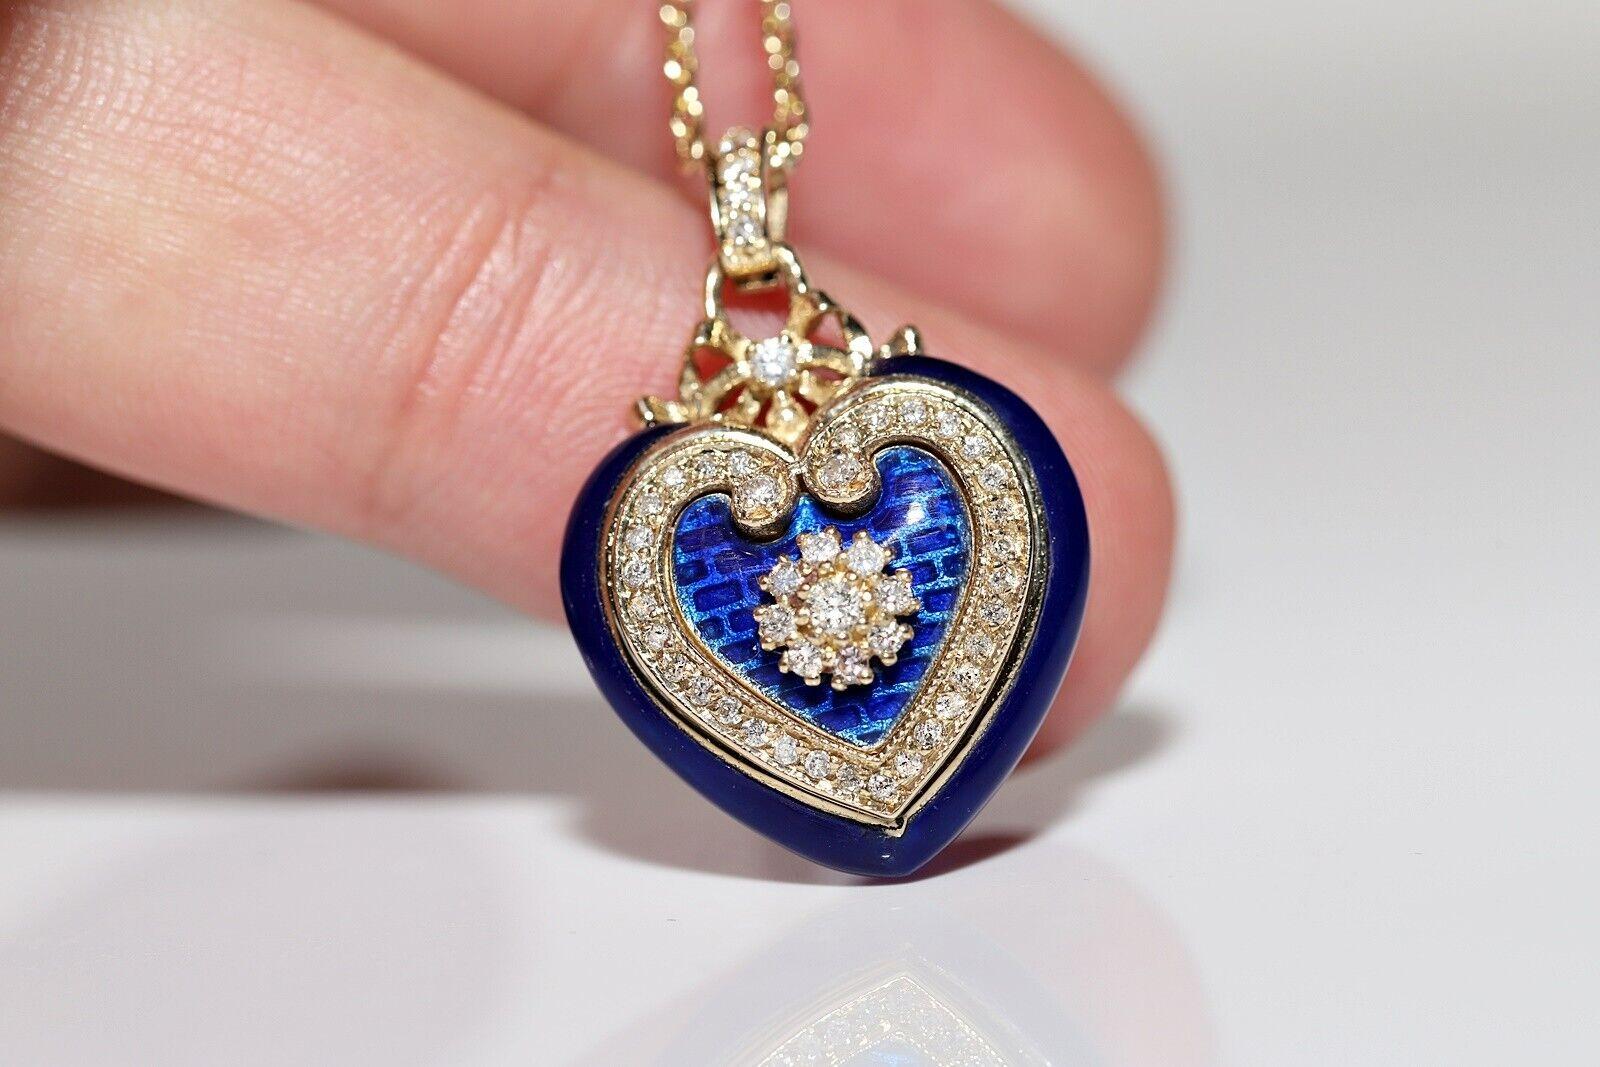 Modern New Made 14k Gold Natural Diamond And Enamel Decorated Heart Pendant Necklace For Sale